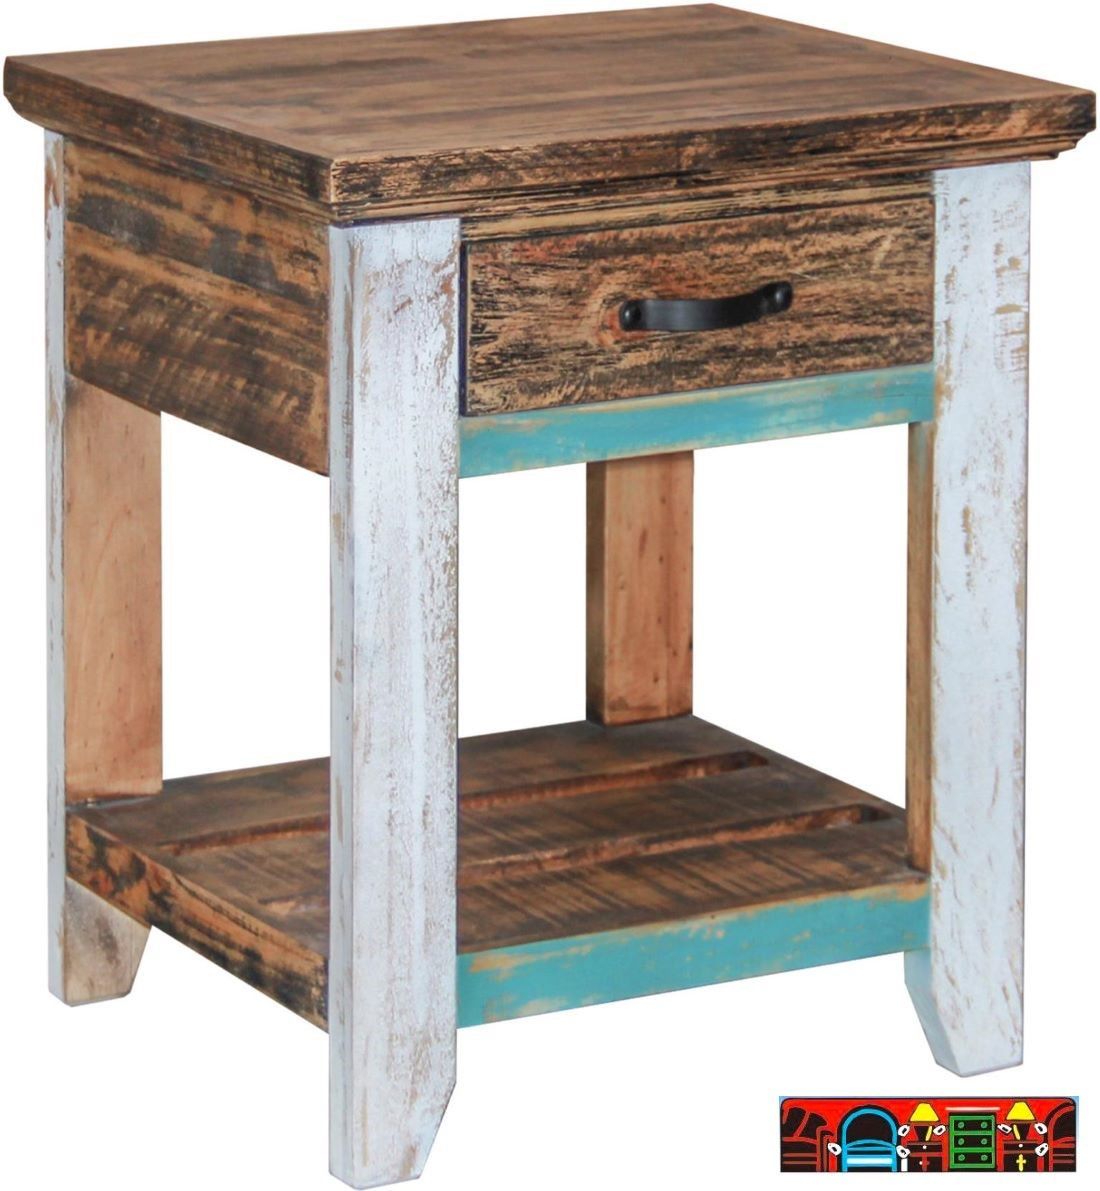 The Cabana Bedroom Nightstand is crafted from solid wood, featuring a blend of brown, white, and turquoise hues with one drawer featuring curved metal handle.